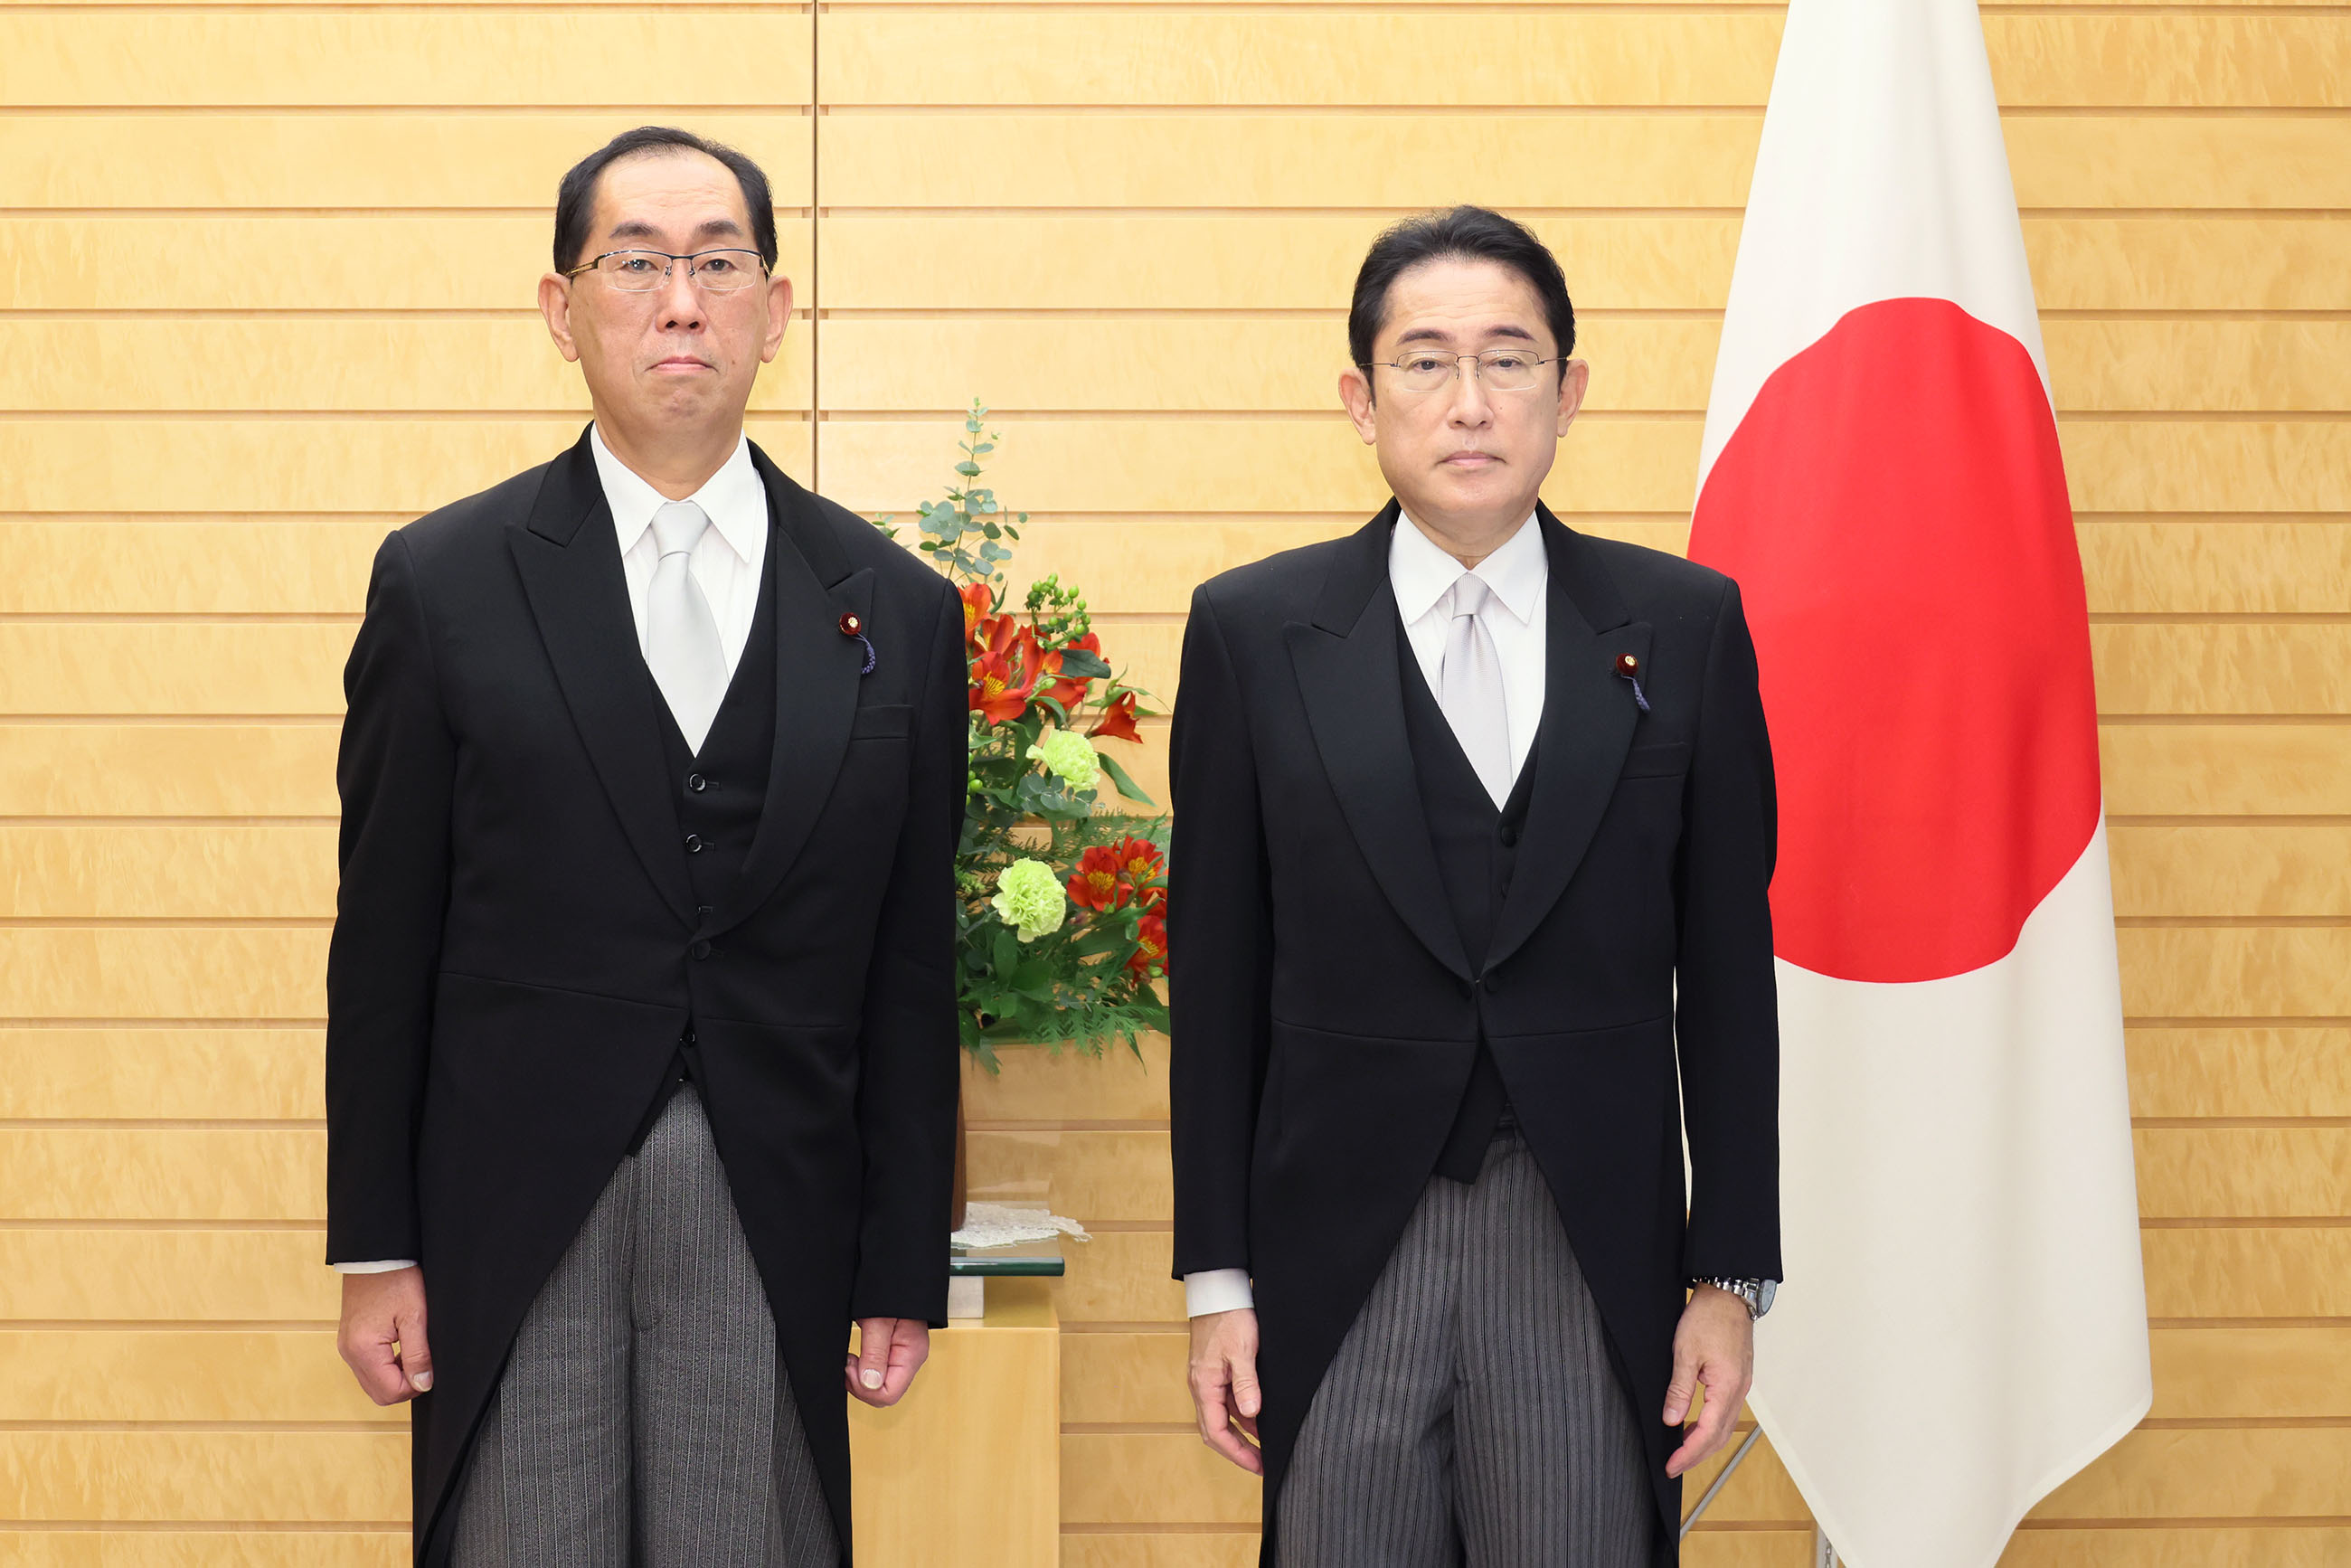 Prime Minister Kishida attending a photograph session with Minister Matsumoto (1)